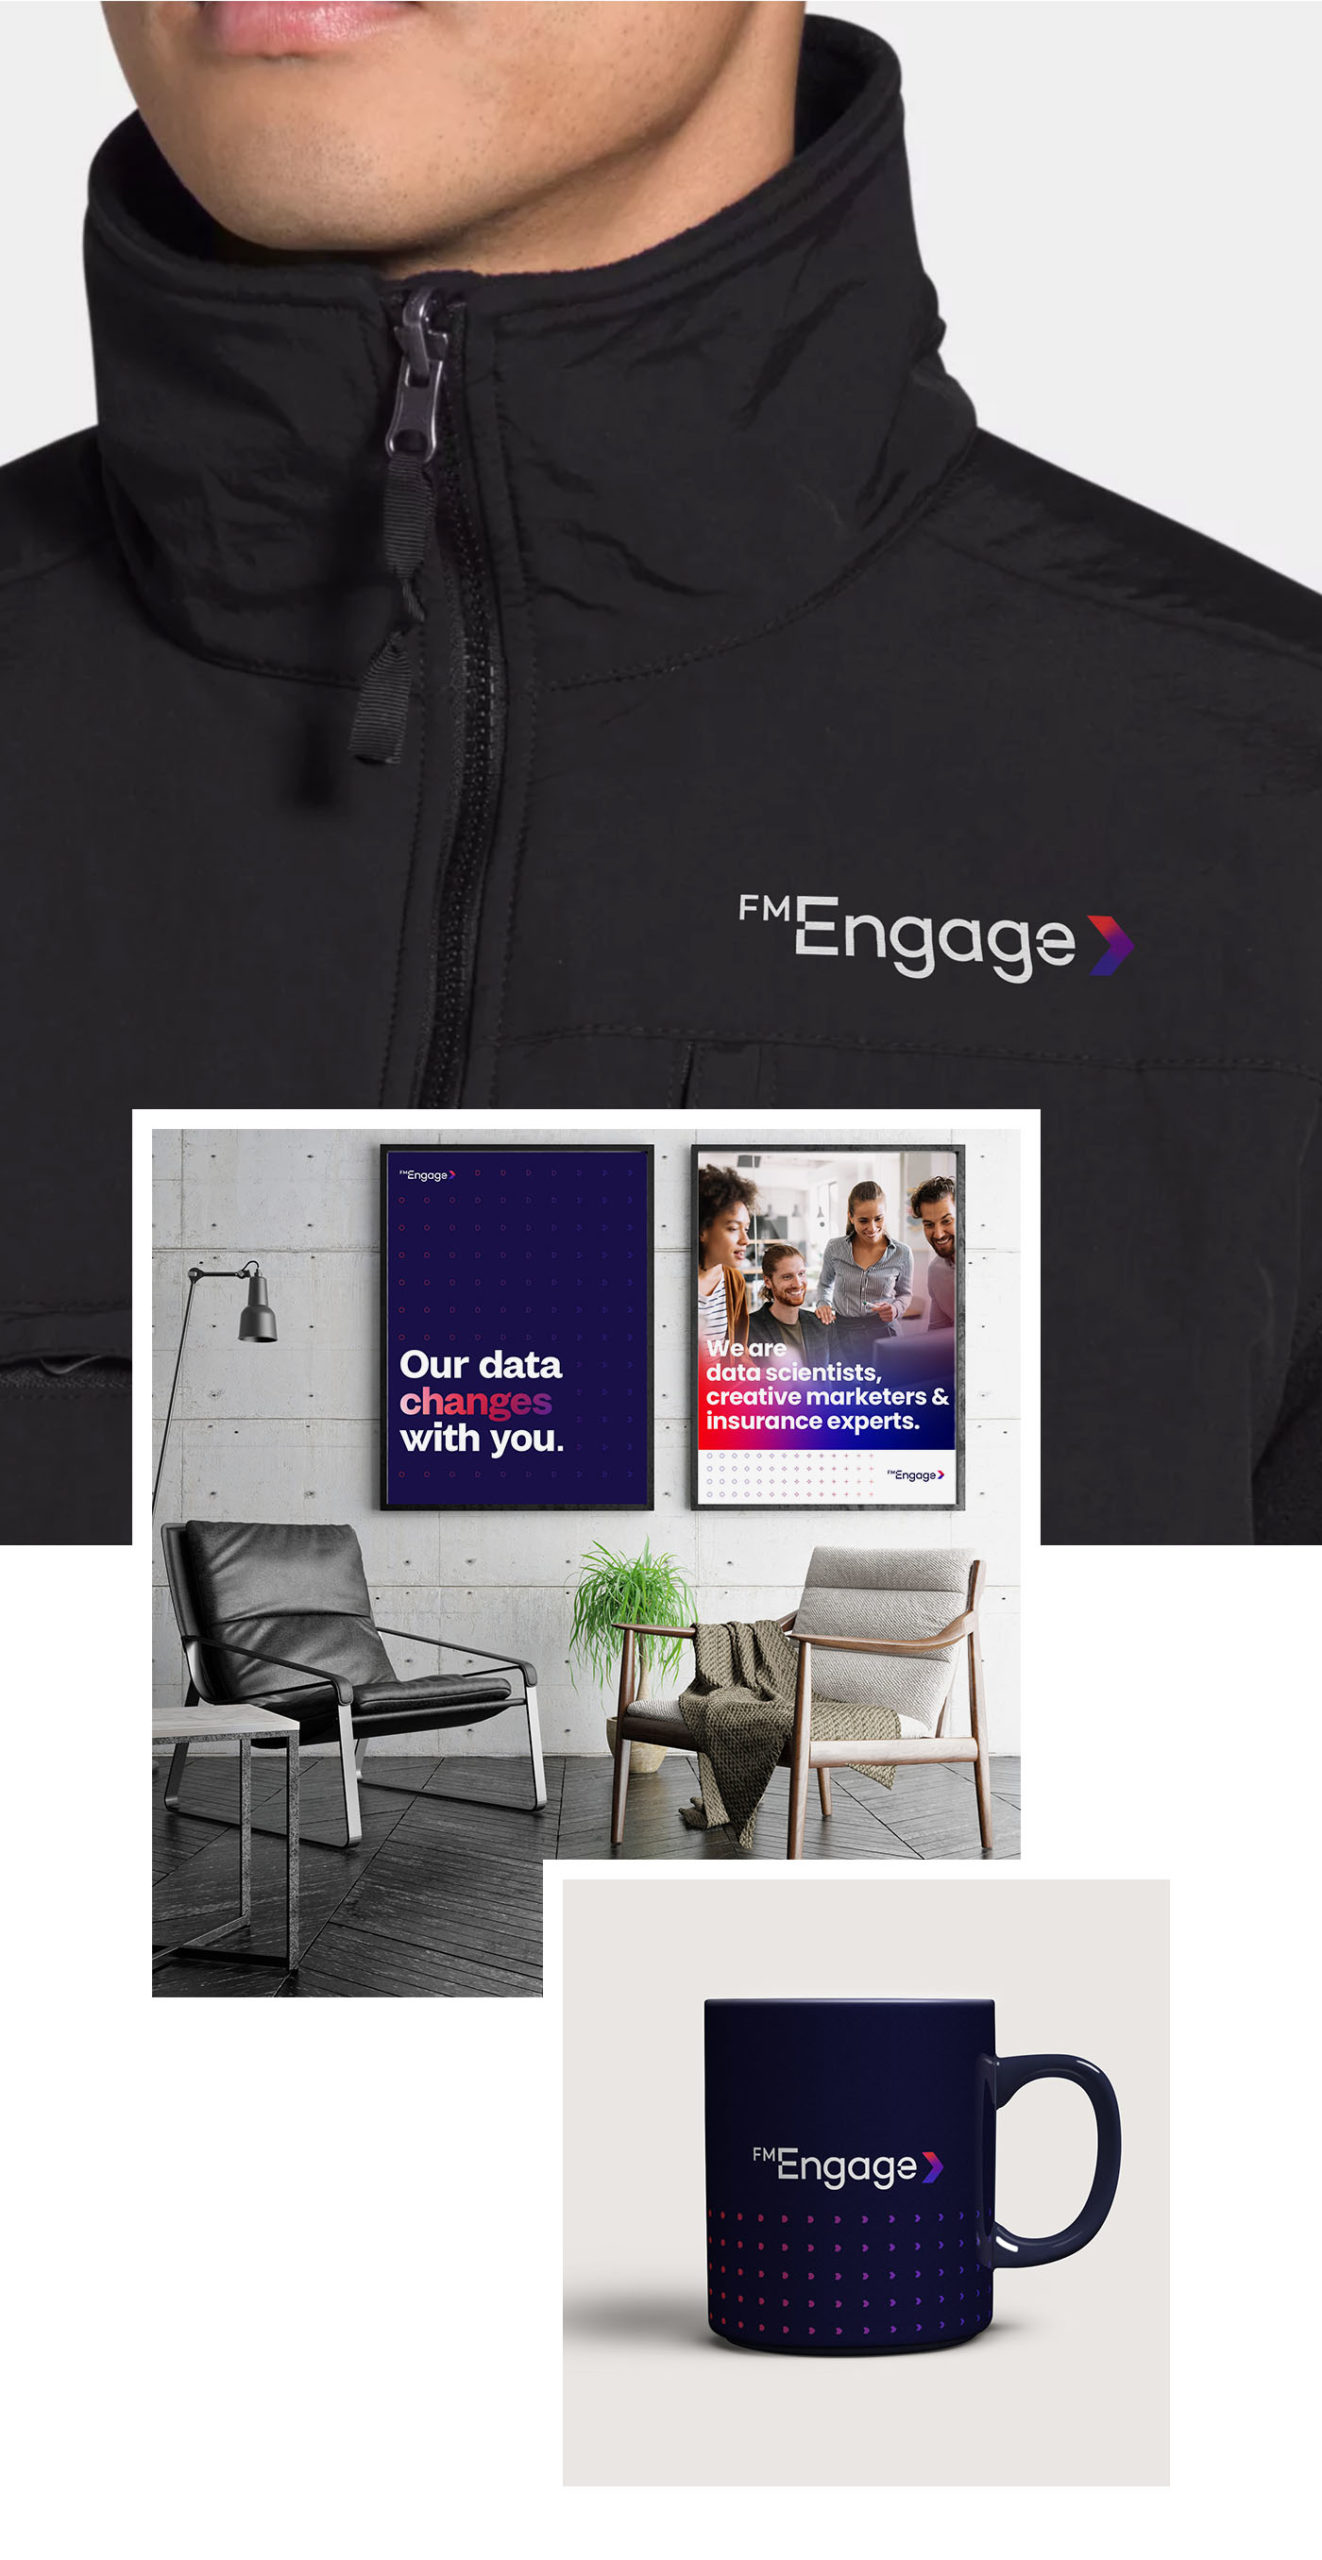 Creative expressions of the new FM Engage branding, including office signage and team swag